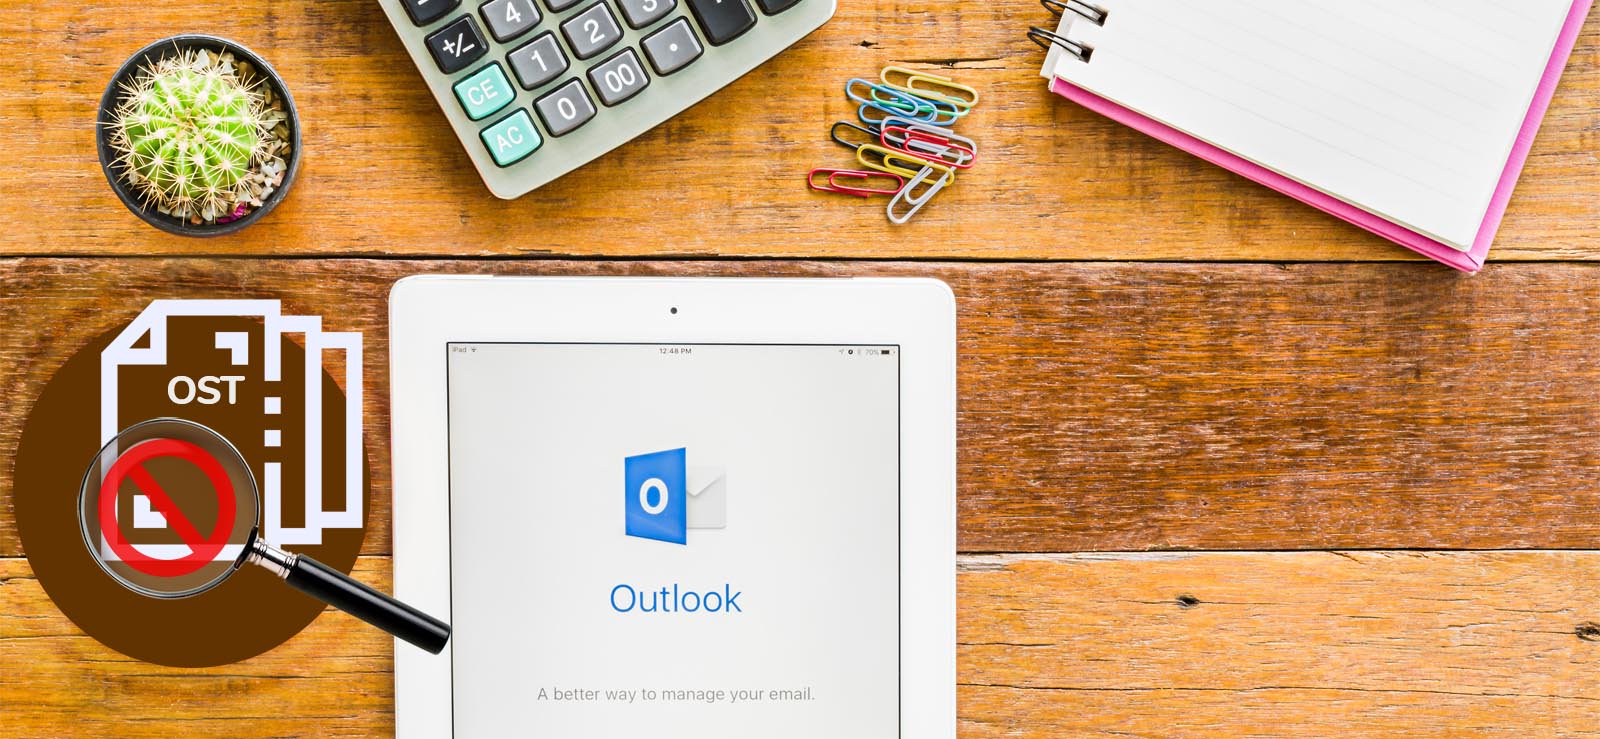 How to Fix Microsoft Outlook not able to find the OST file